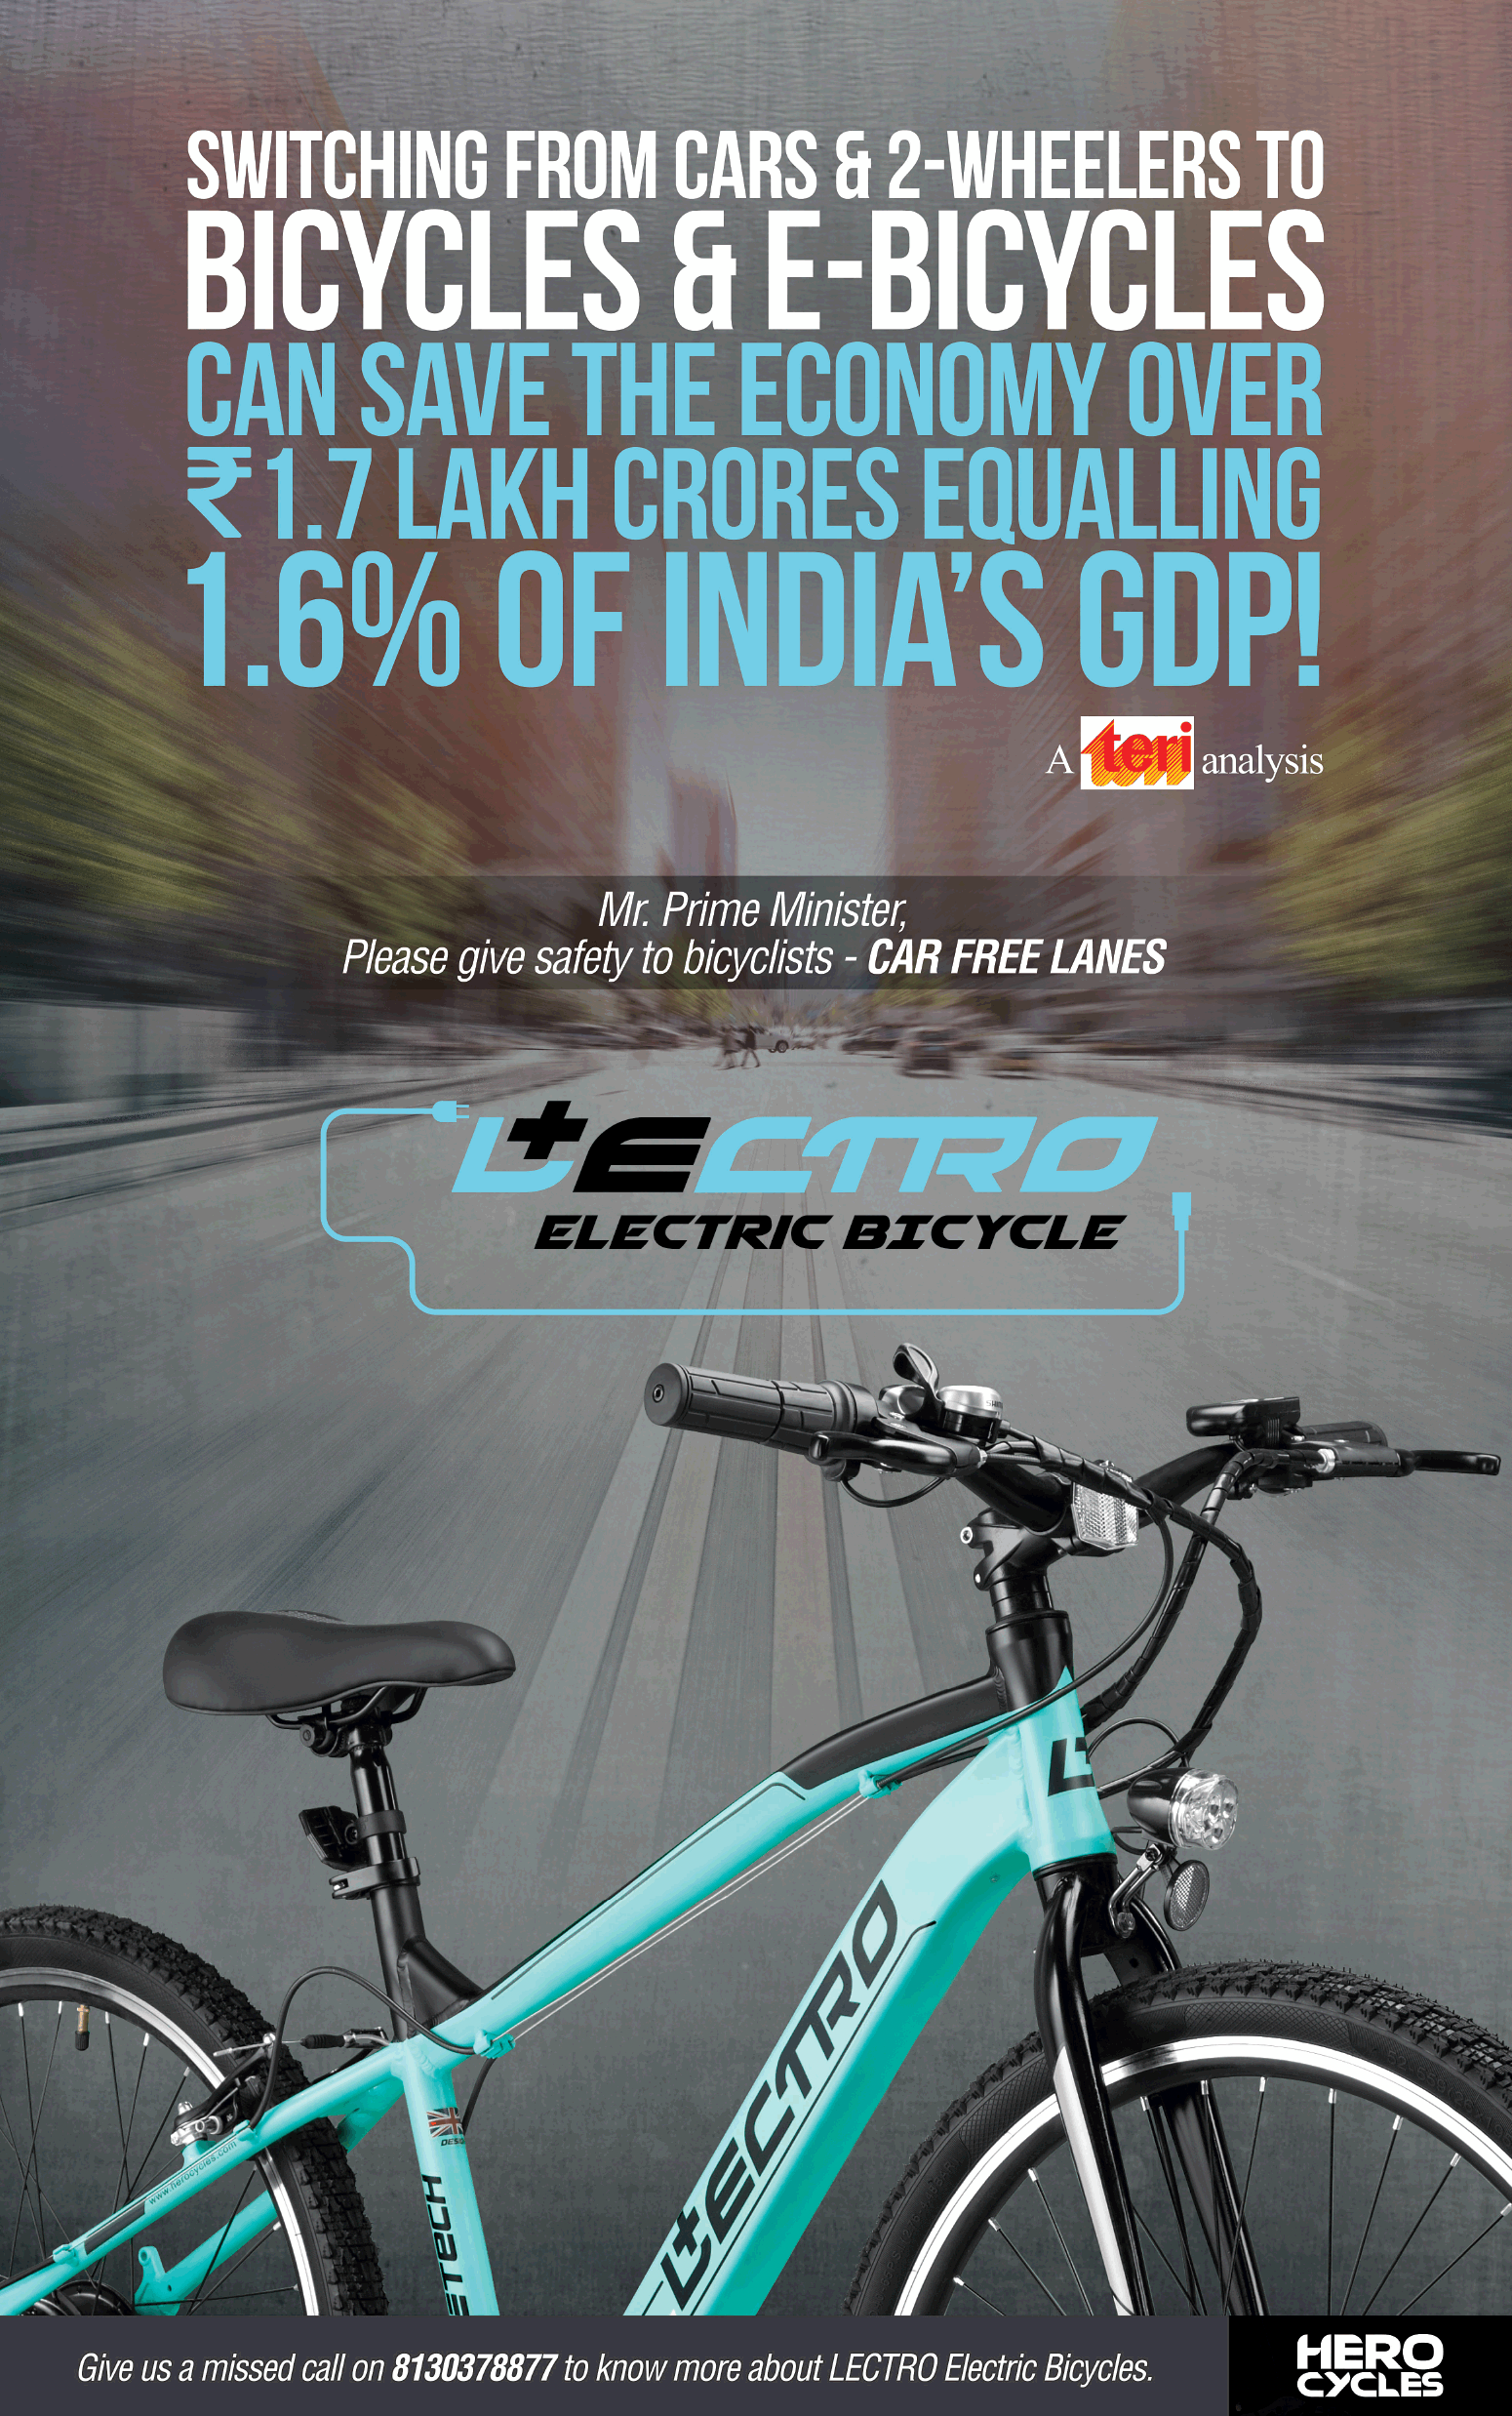 hero-cycles-lectro-electric-bicycle-ad-times-of-india-delhi-28-06-2019.png